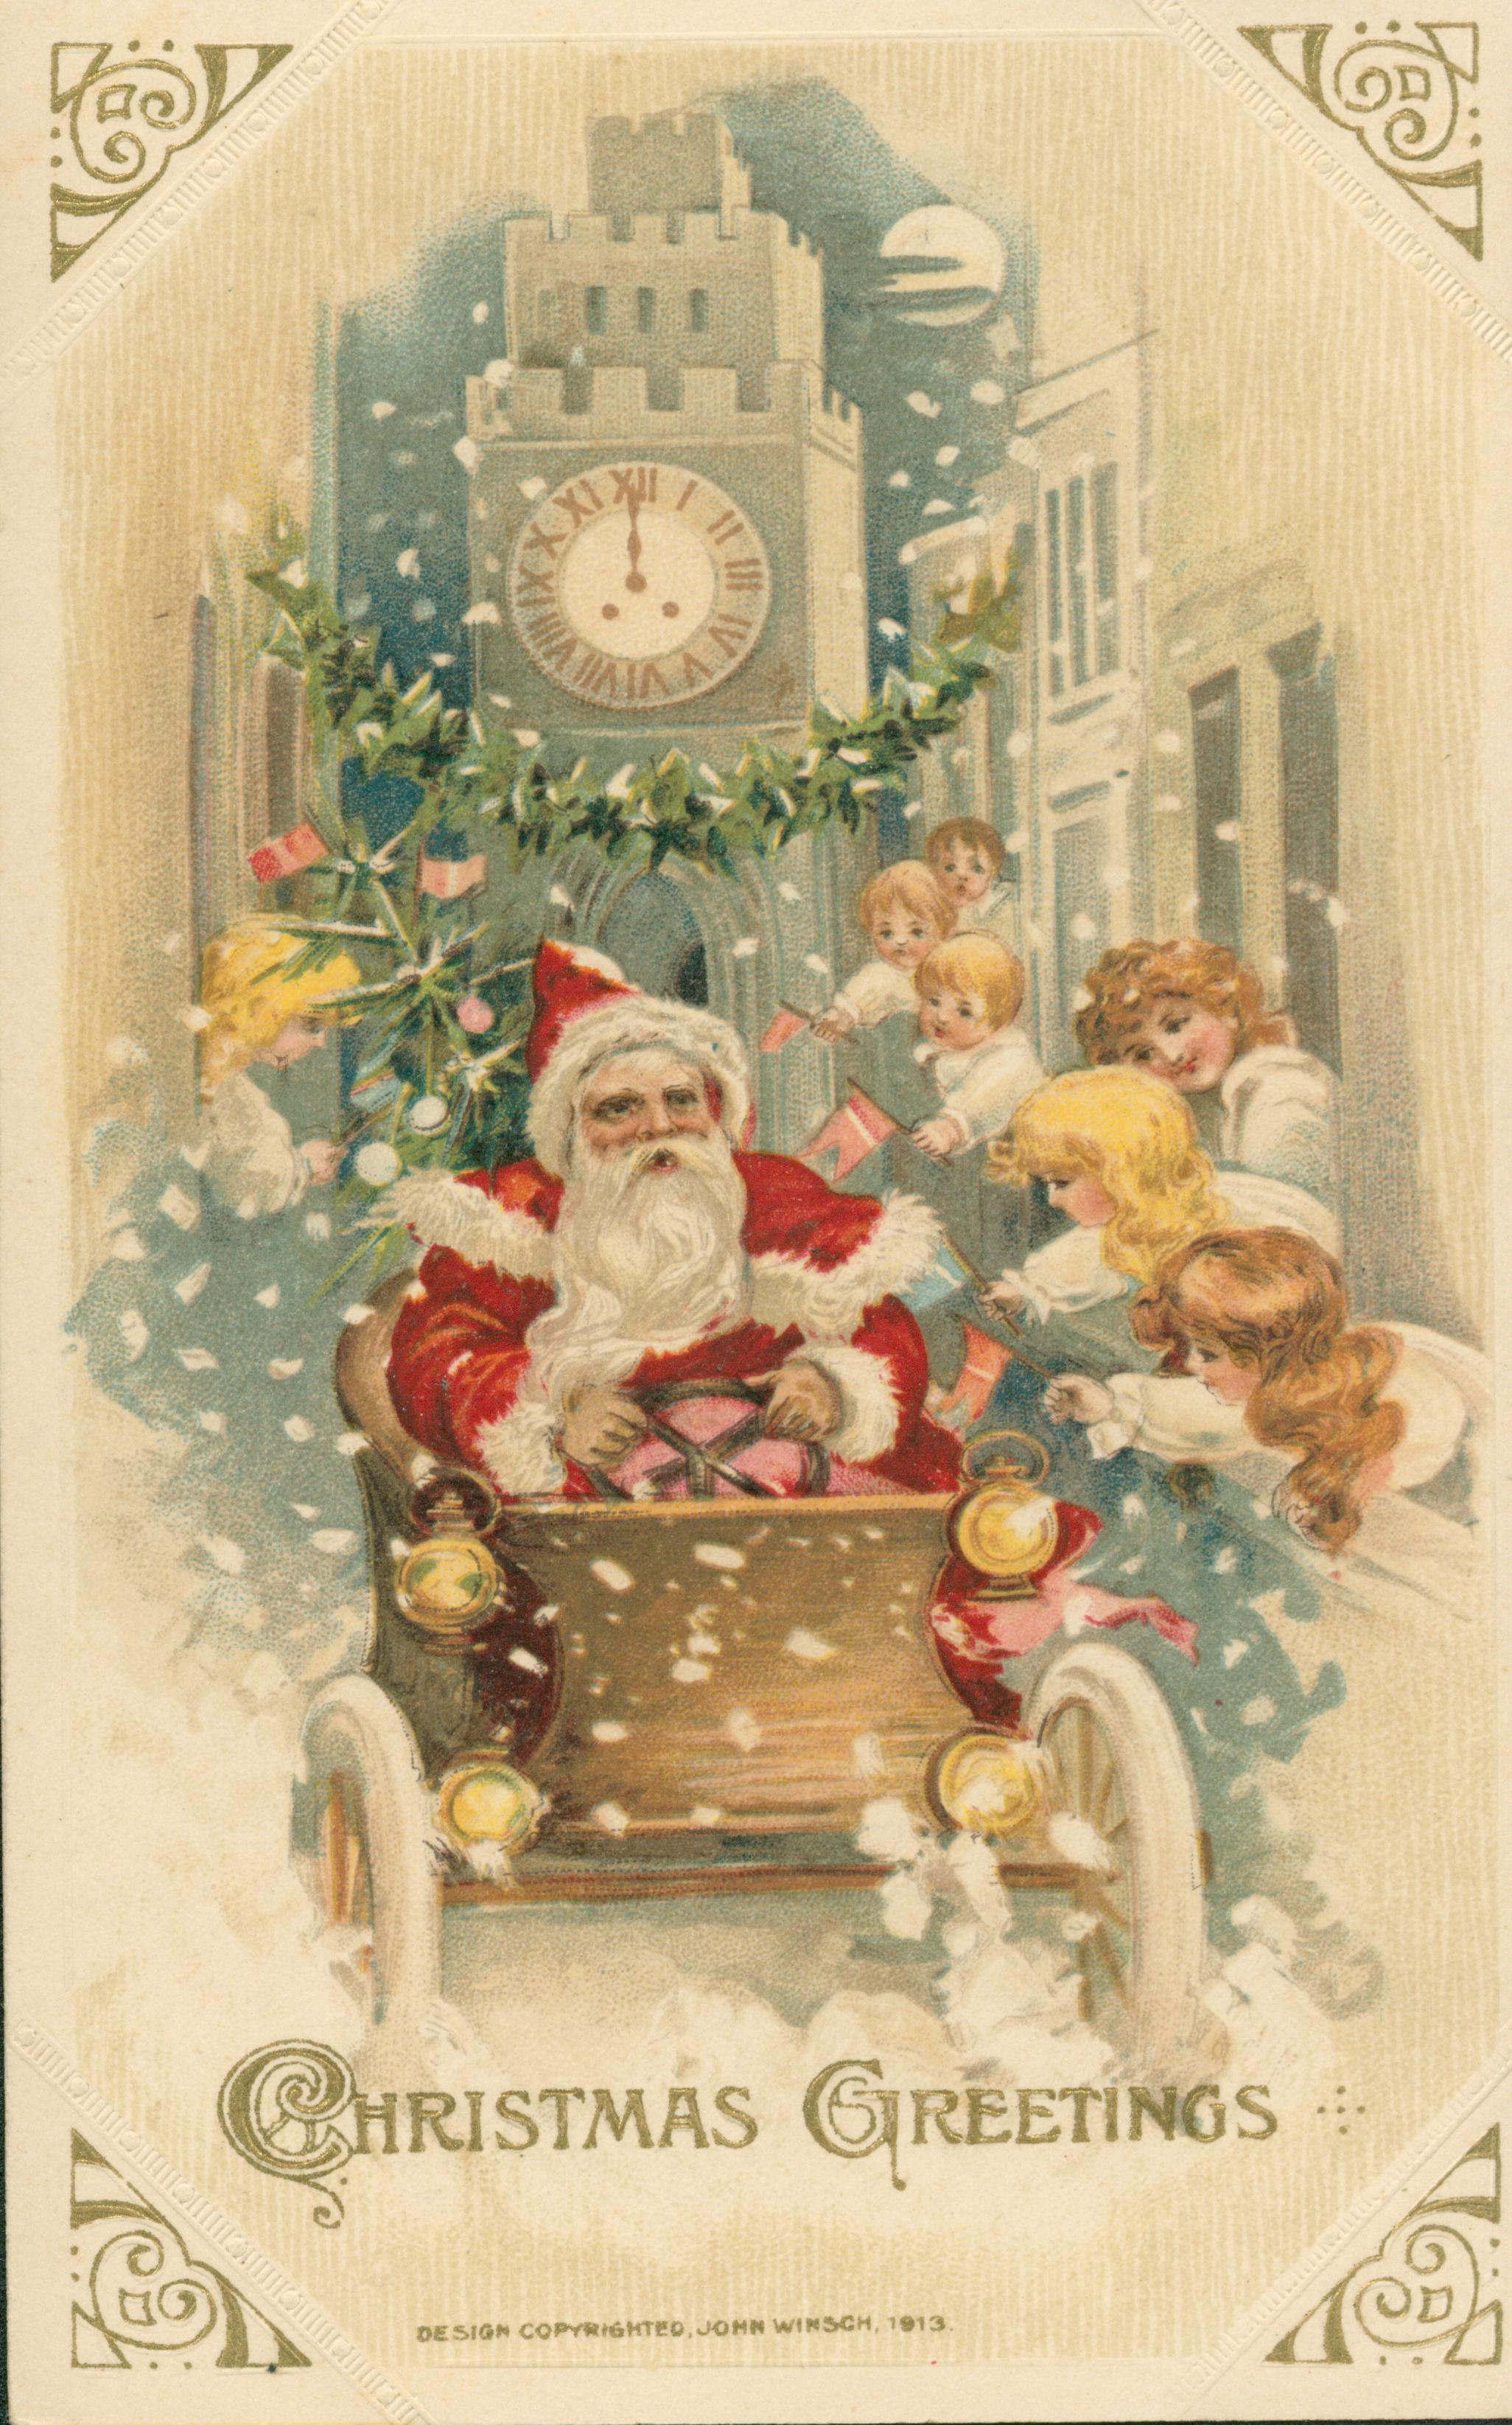 Shows Santa Claus in driving a car through a narrow street, with children leaning out the windows